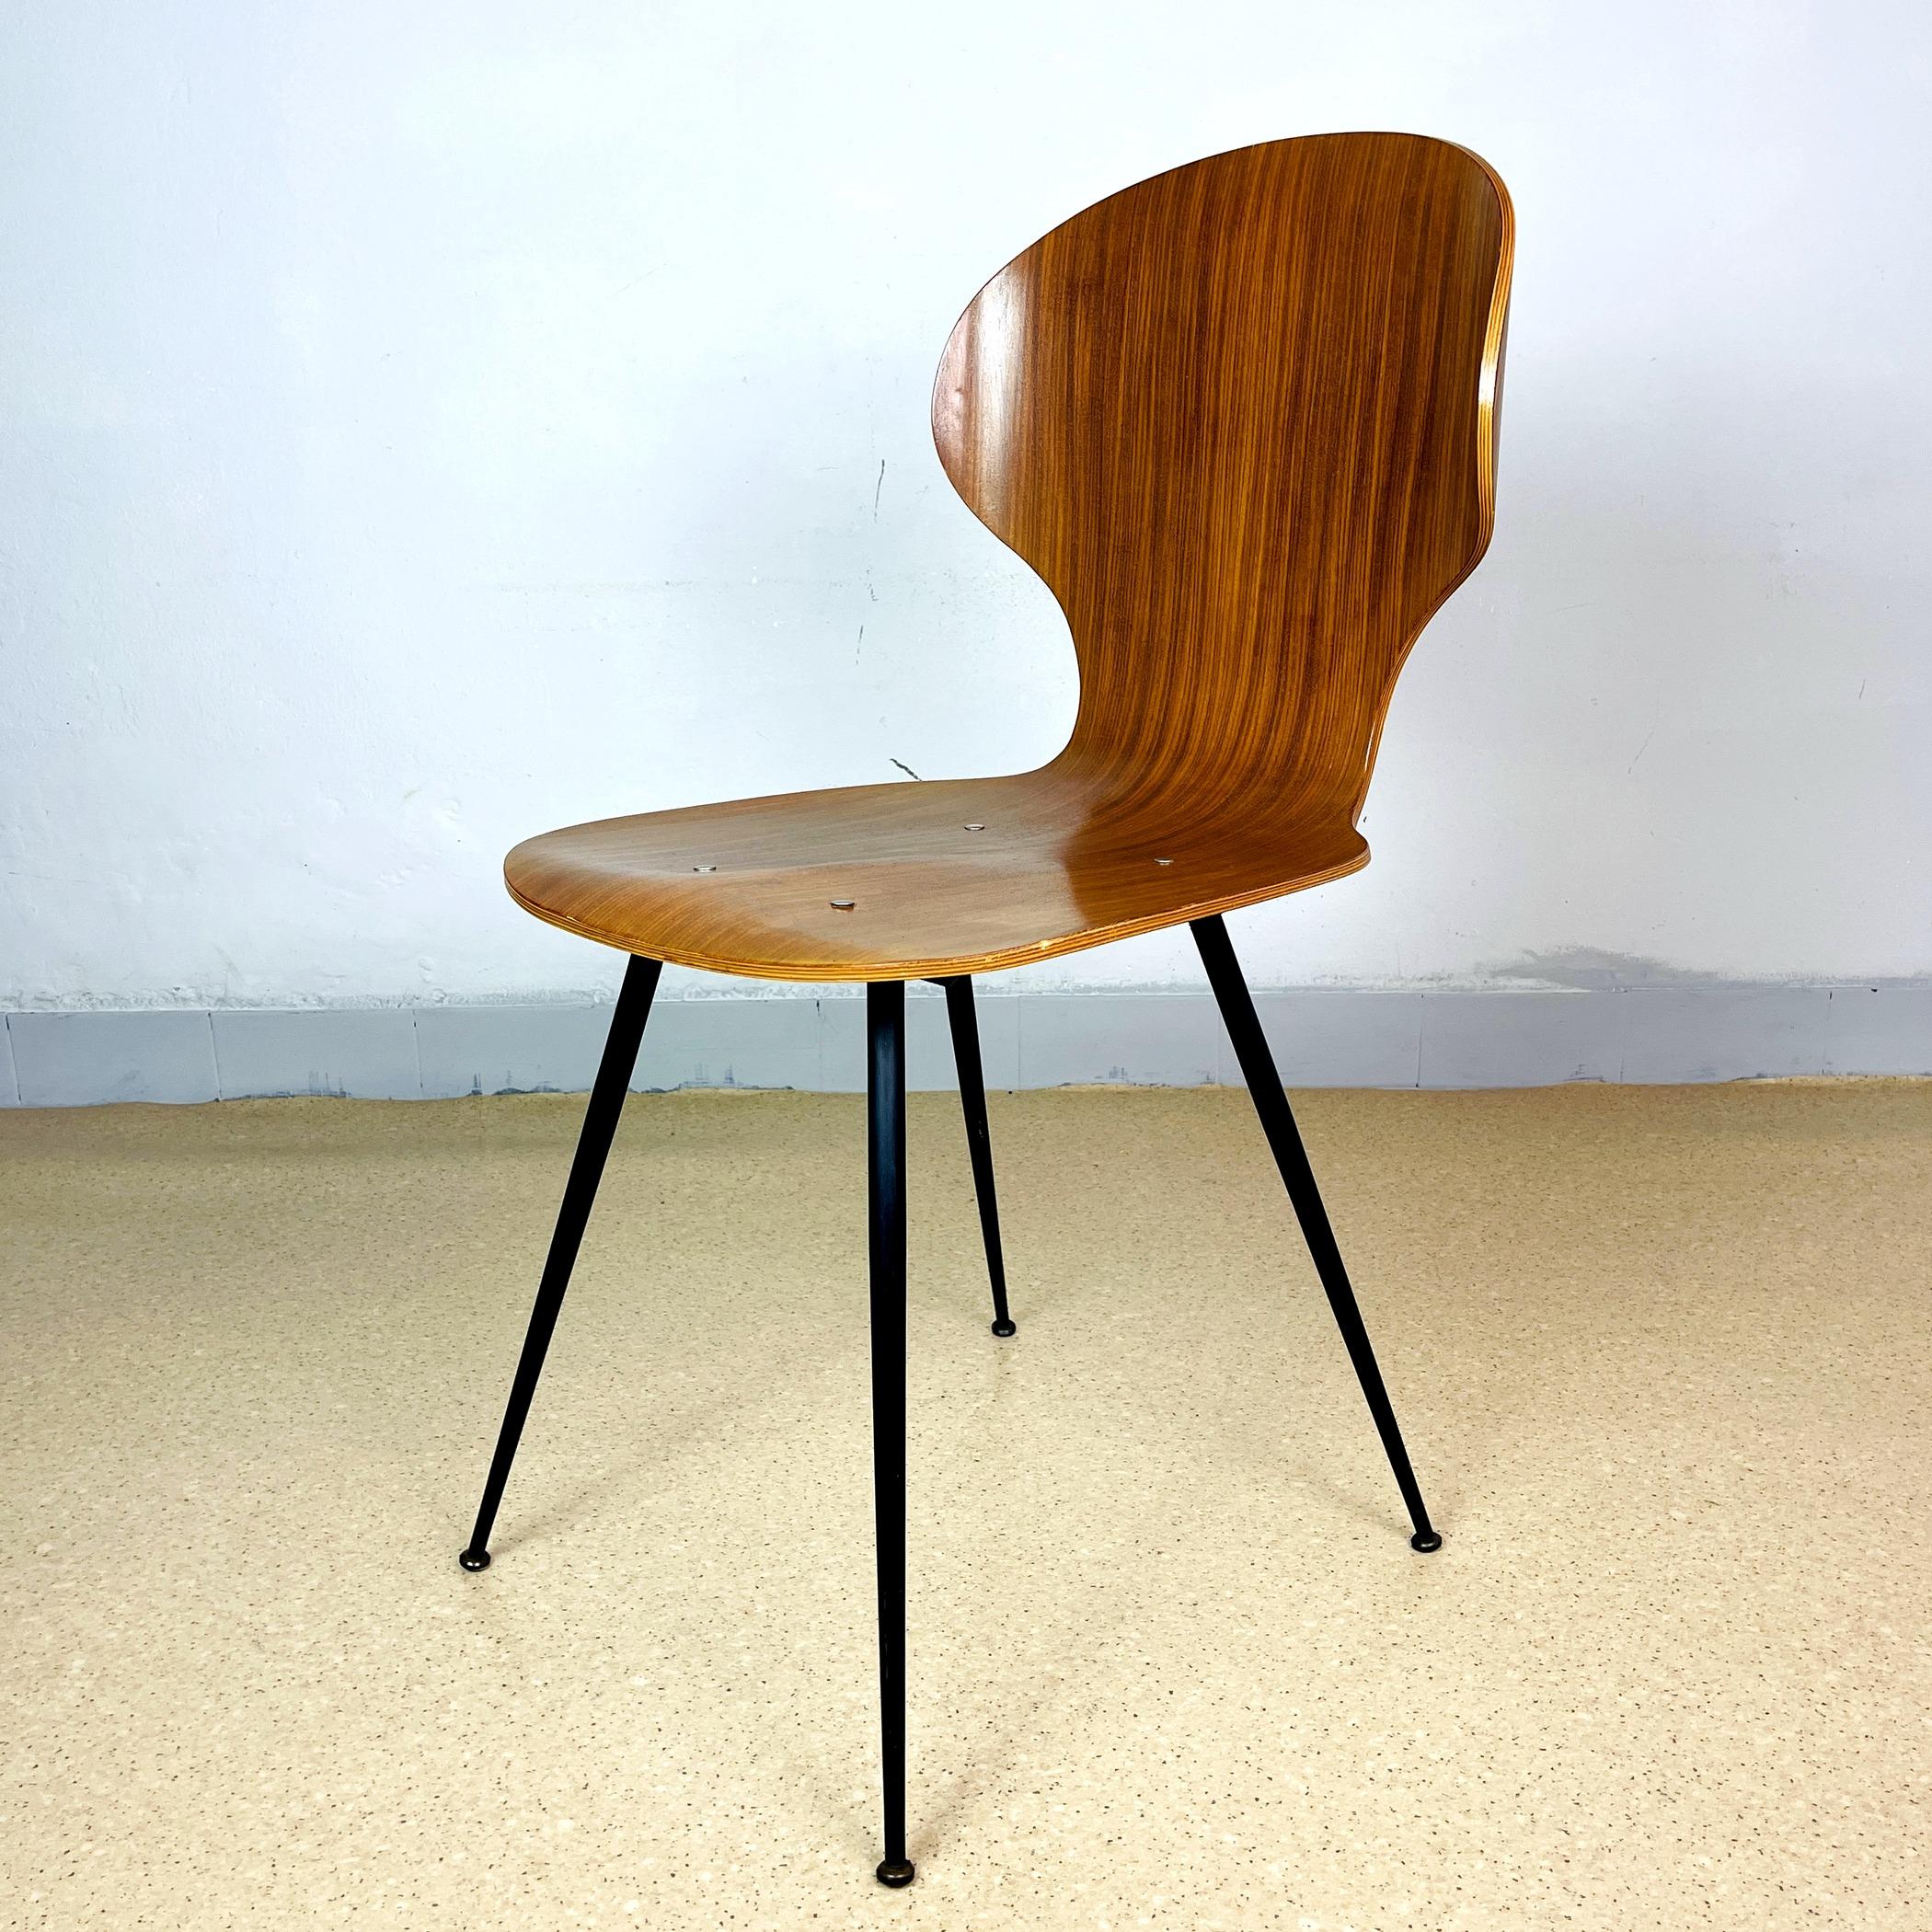 Italian Dining chair Lulli by Carlo Ratti for ILC Lissone Italy 70s Set of 2 For Sale